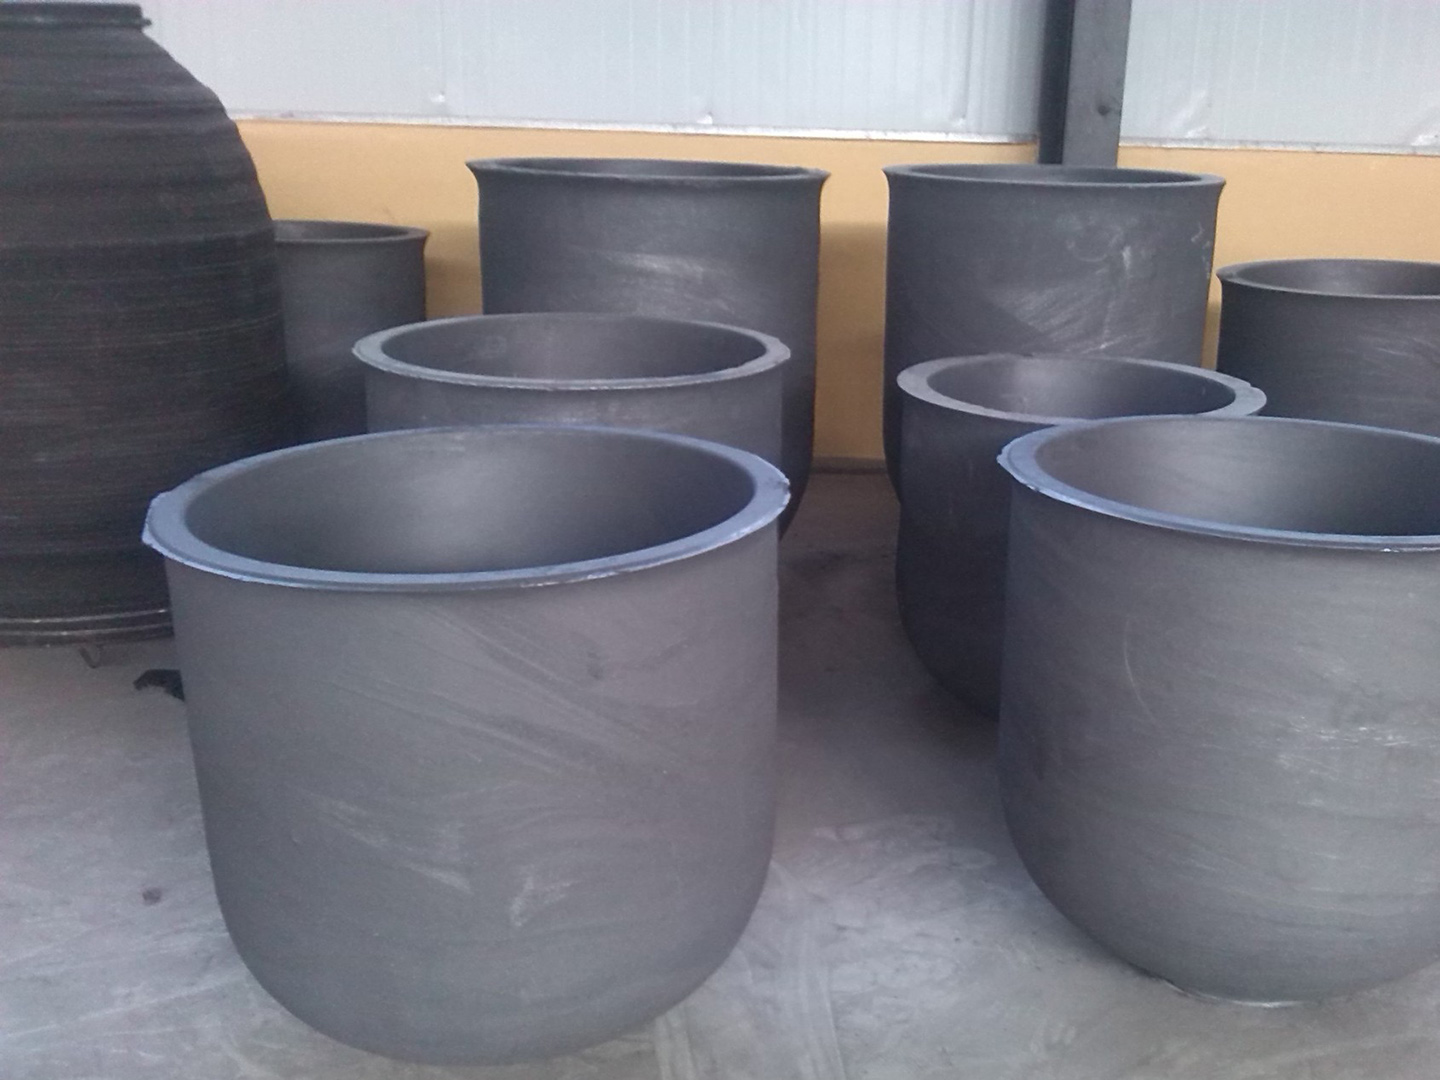 Utensils for melting metals or other substances, generally made of refractory materials such as clay and graphite1